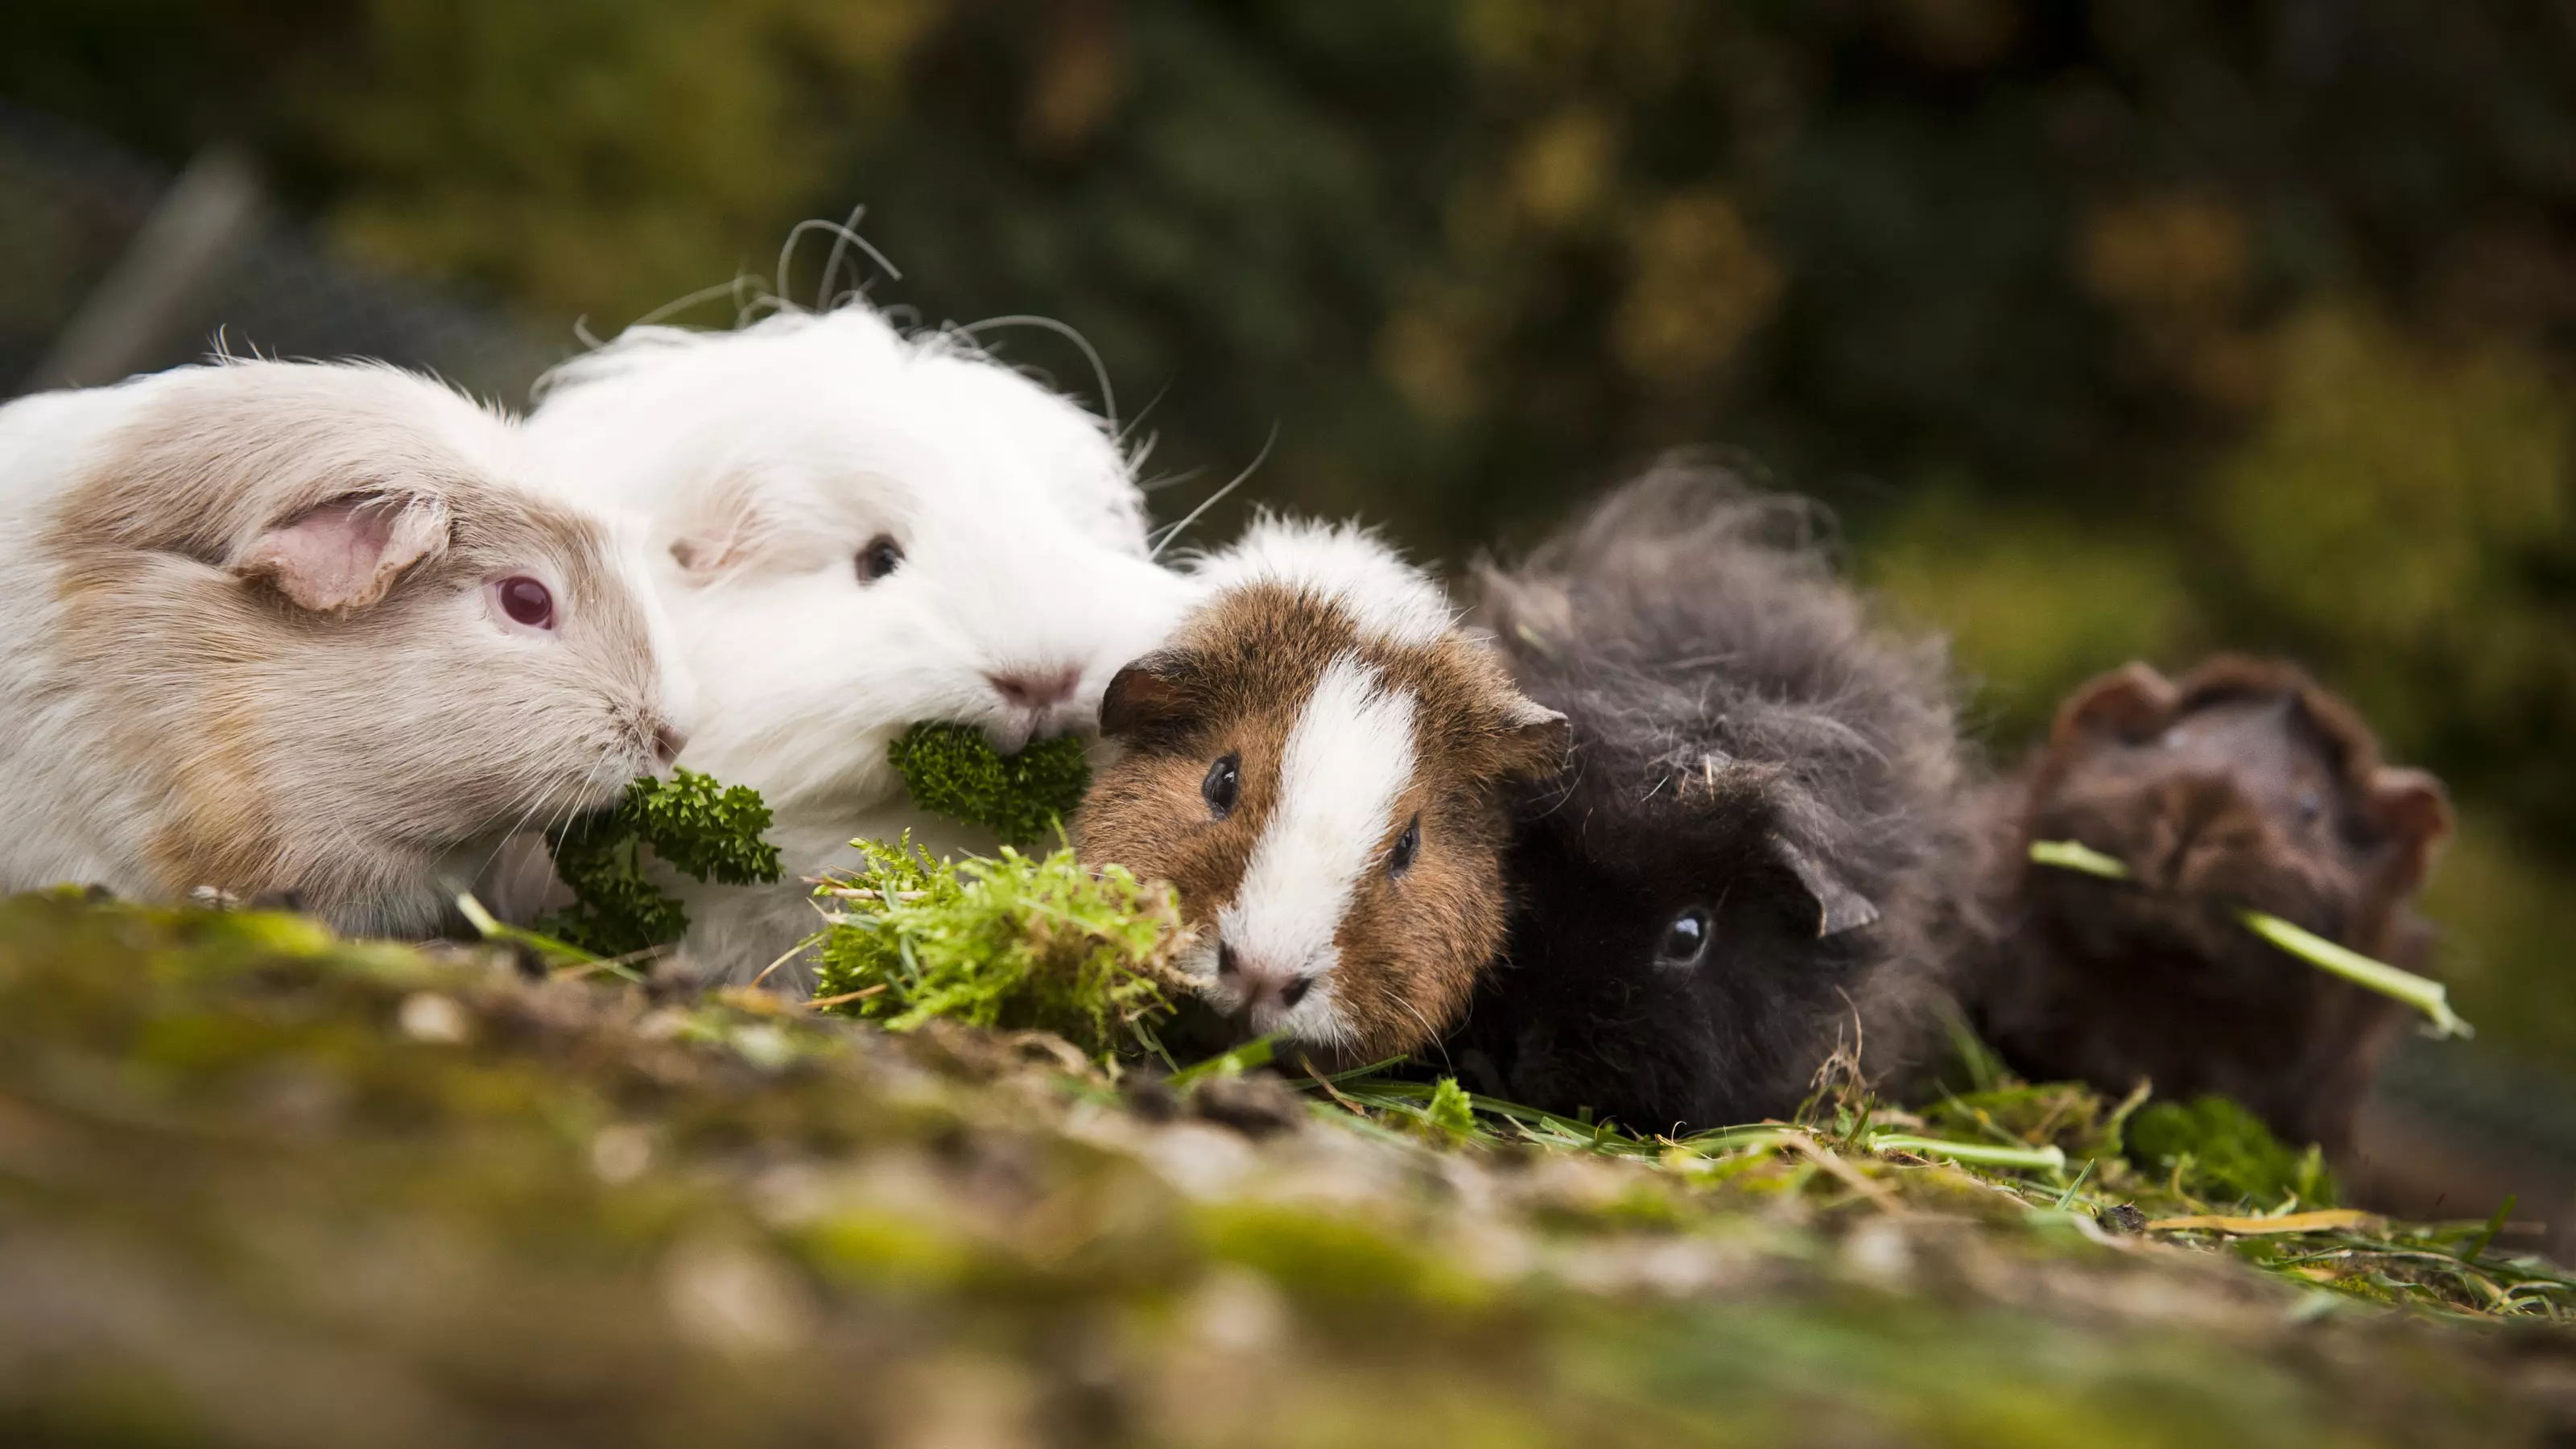 A herd of guinea pigs eating together outdoors.